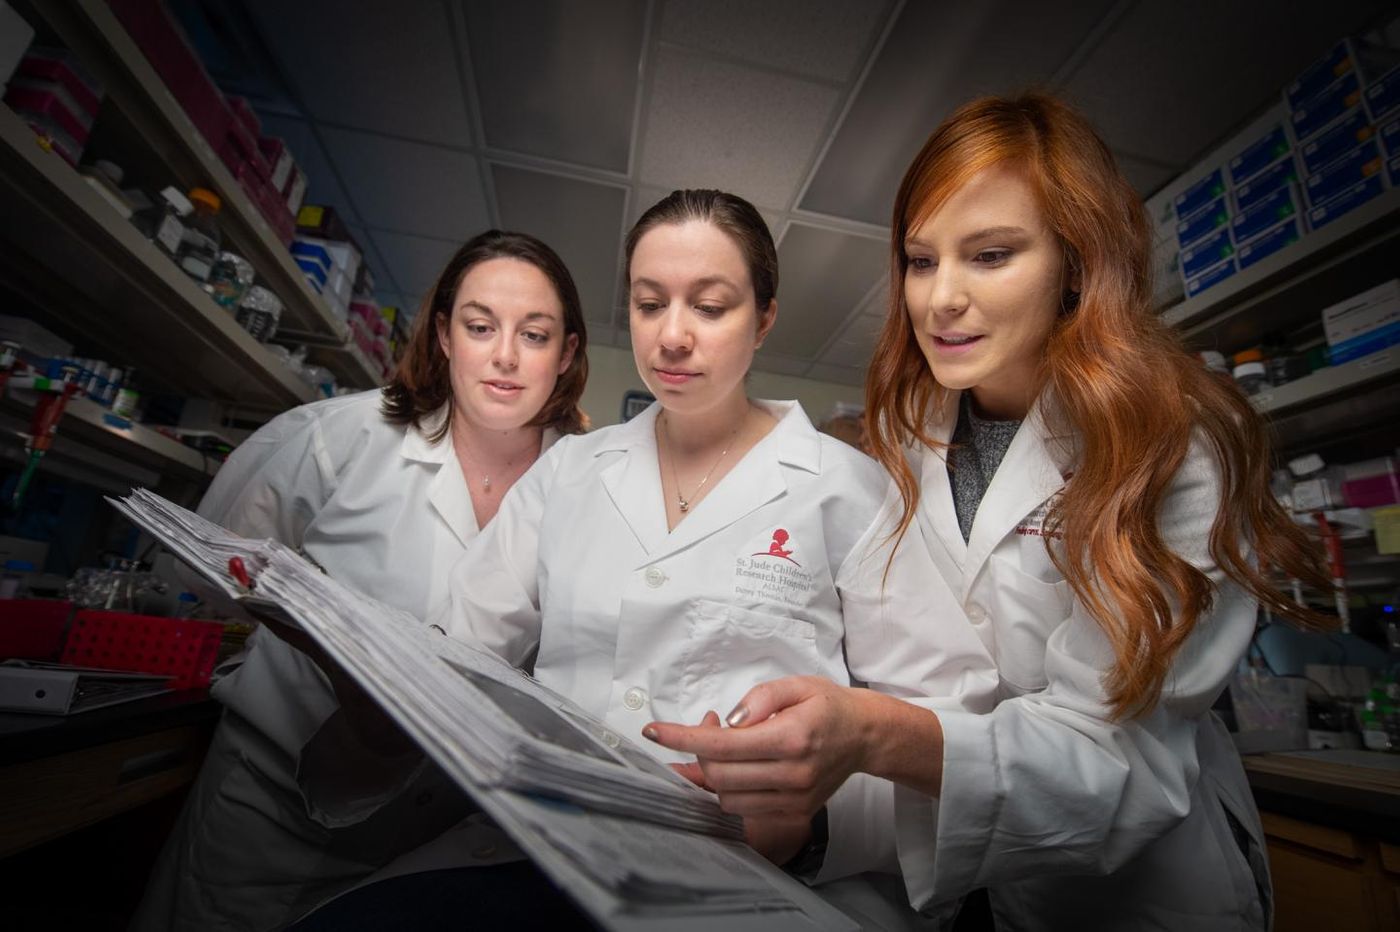 St. Jude scientists have used a 3D genome to improve understanding of gene regulation during development and disease. Pictured here, left to right, are Jackie Norrie, Ph.D.; Marybeth Lupo, Ph.D.; and Victoria Honnell, a graduate student, who work in the lab of Michael Dyer, Ph.D. / Credit: St. Jude Children's Research Hospital